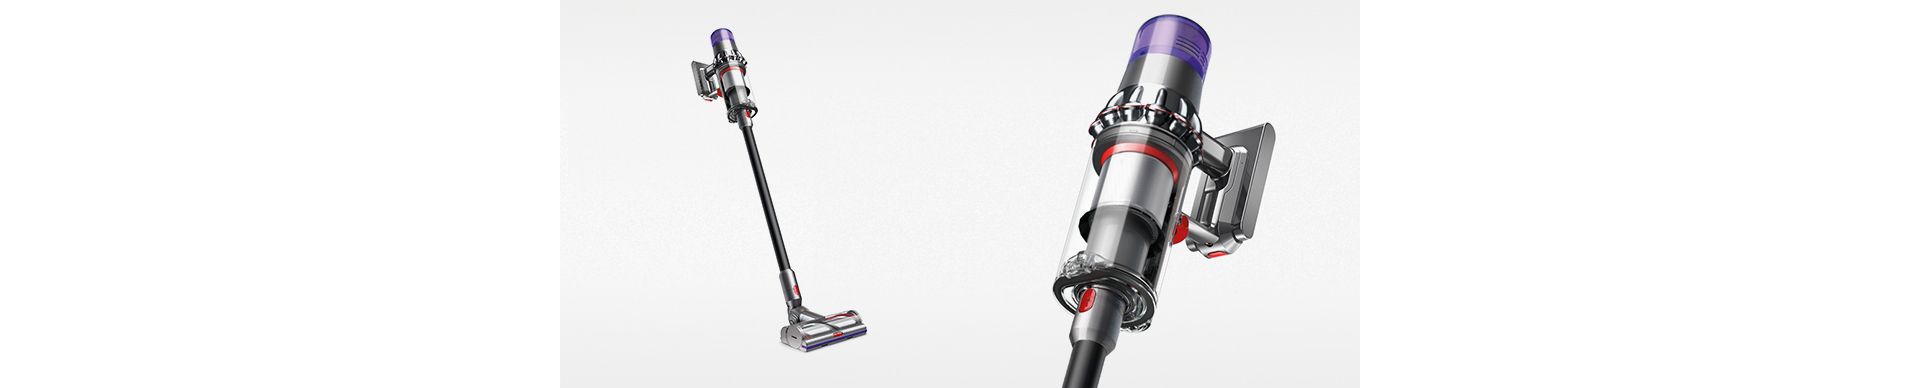 Image showing Dyson V11 Total Clean Extra cordless vacuum